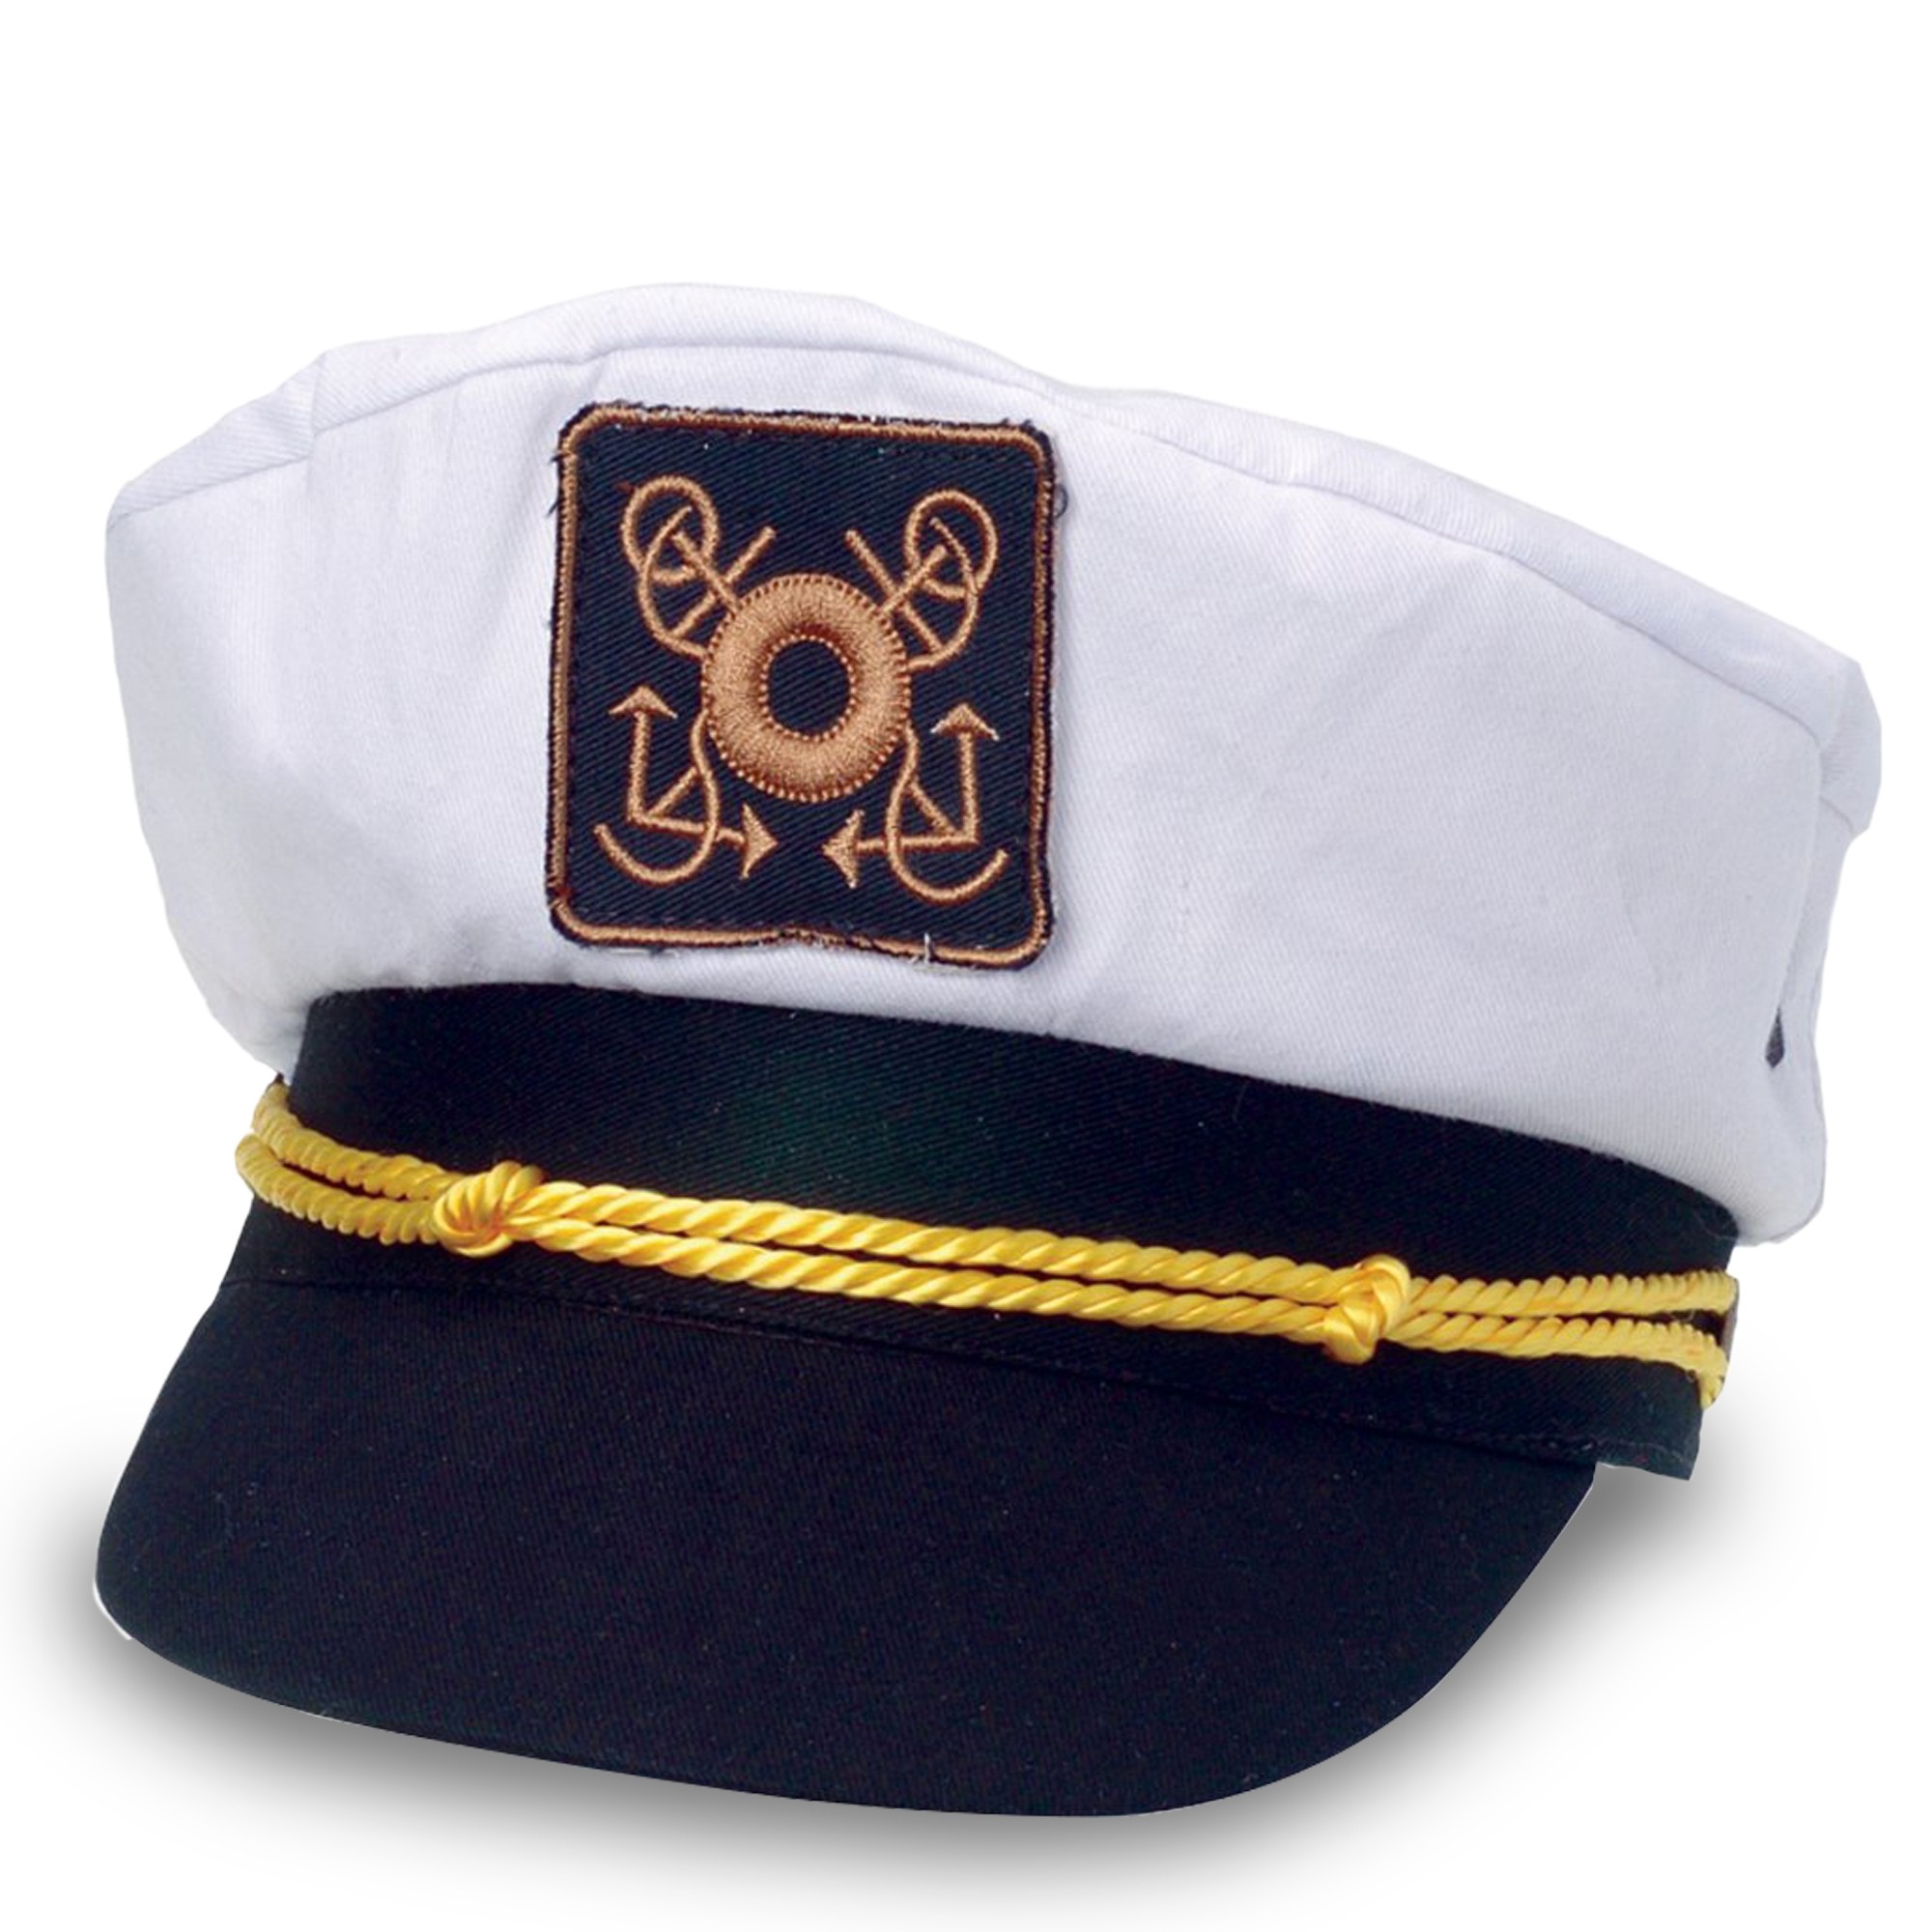 white yacht hat for sale